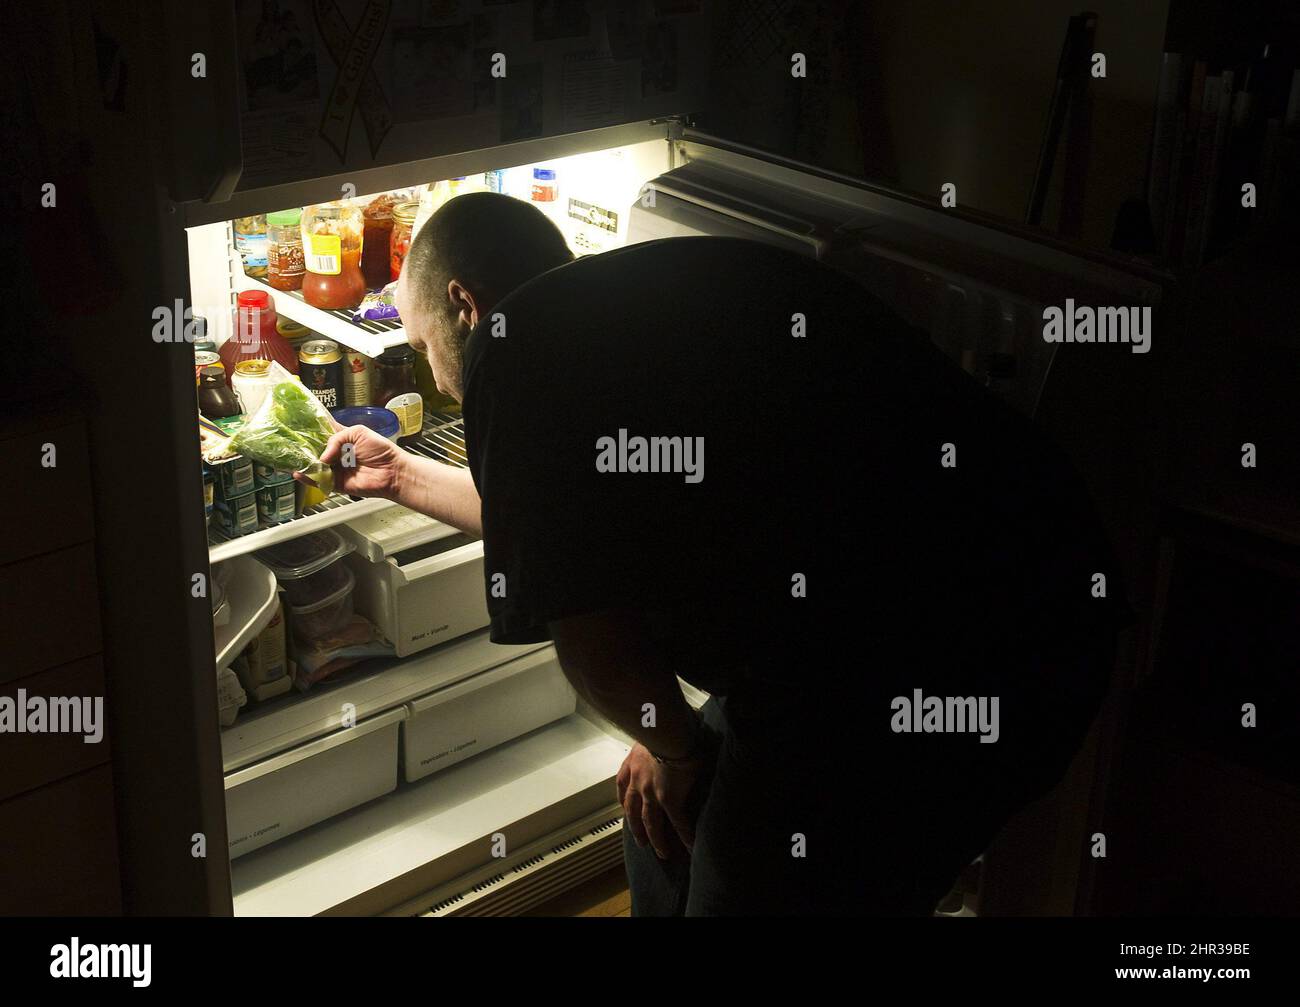 Bryan Kautz looks in his fridge in Toronto on Thursday, May 12, 2011. Snacking at night is one of the rituals of our food-abundant society, whether it's a bowl of cereal or a bag of chips. But as pleasurable as it is, post-supper eating does little to boost our health. THE CANADIAN PRESS/Nathan Denette Stock Photo